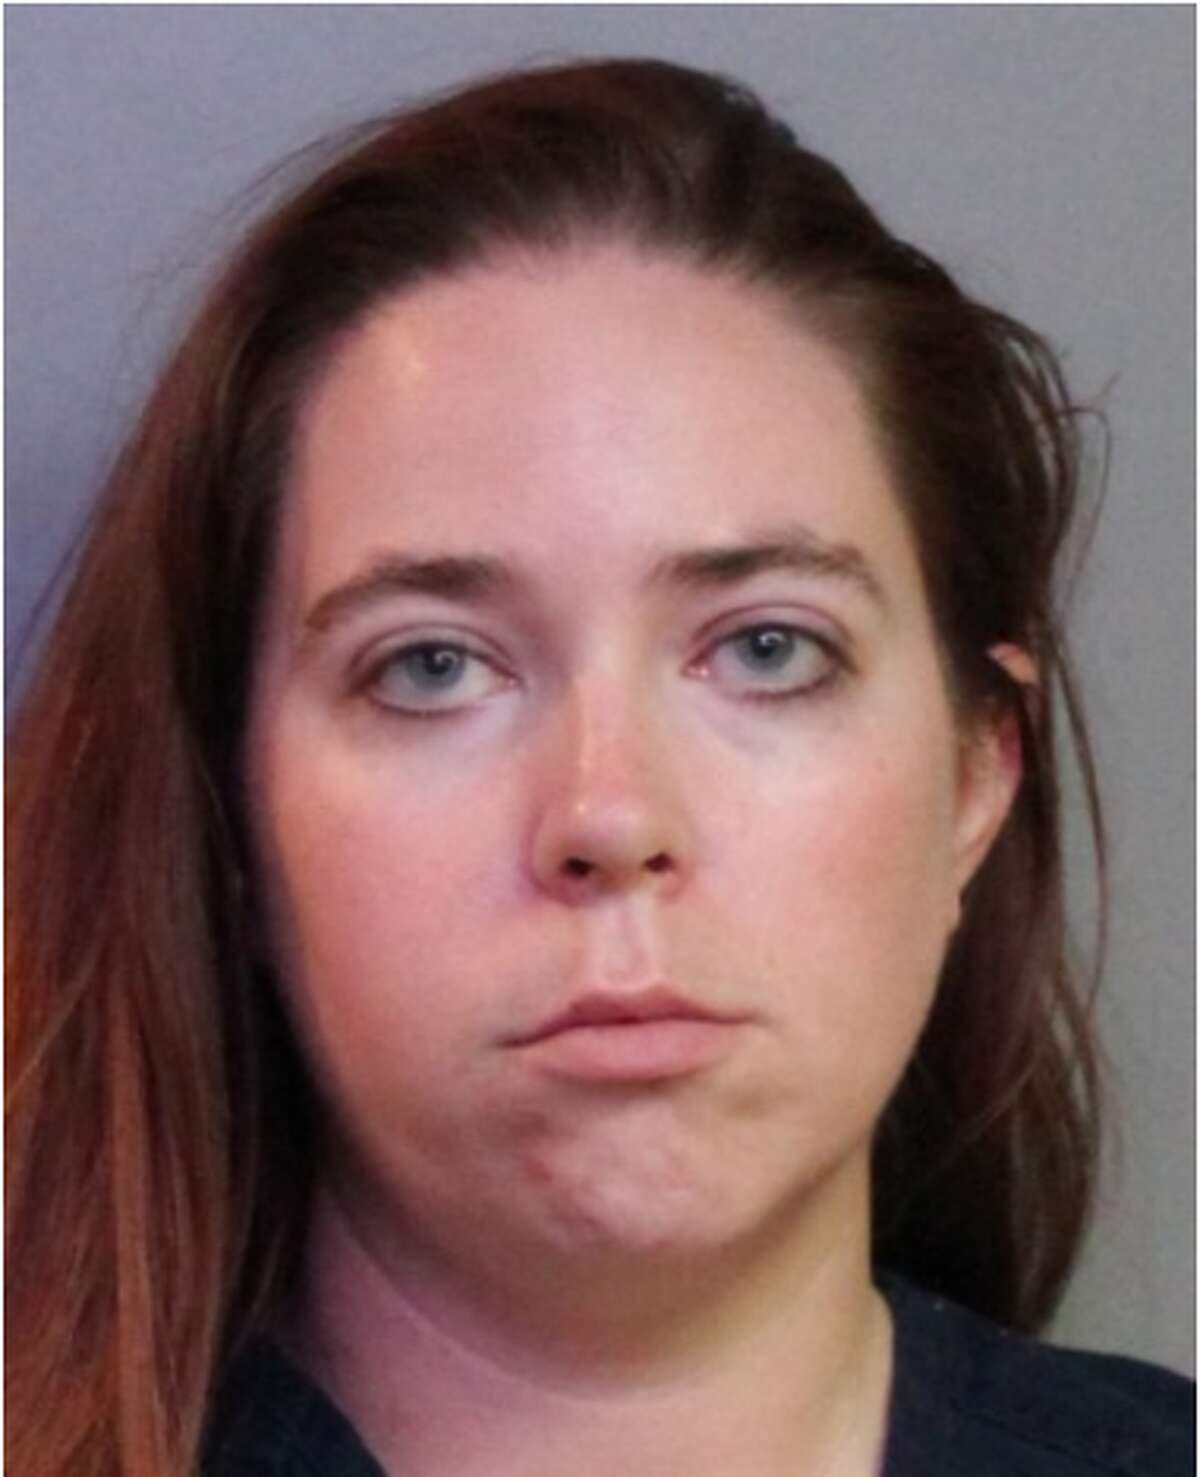 Florida teacher admits to sending nude photos to 15-year-old Texas boy,  turns herself in